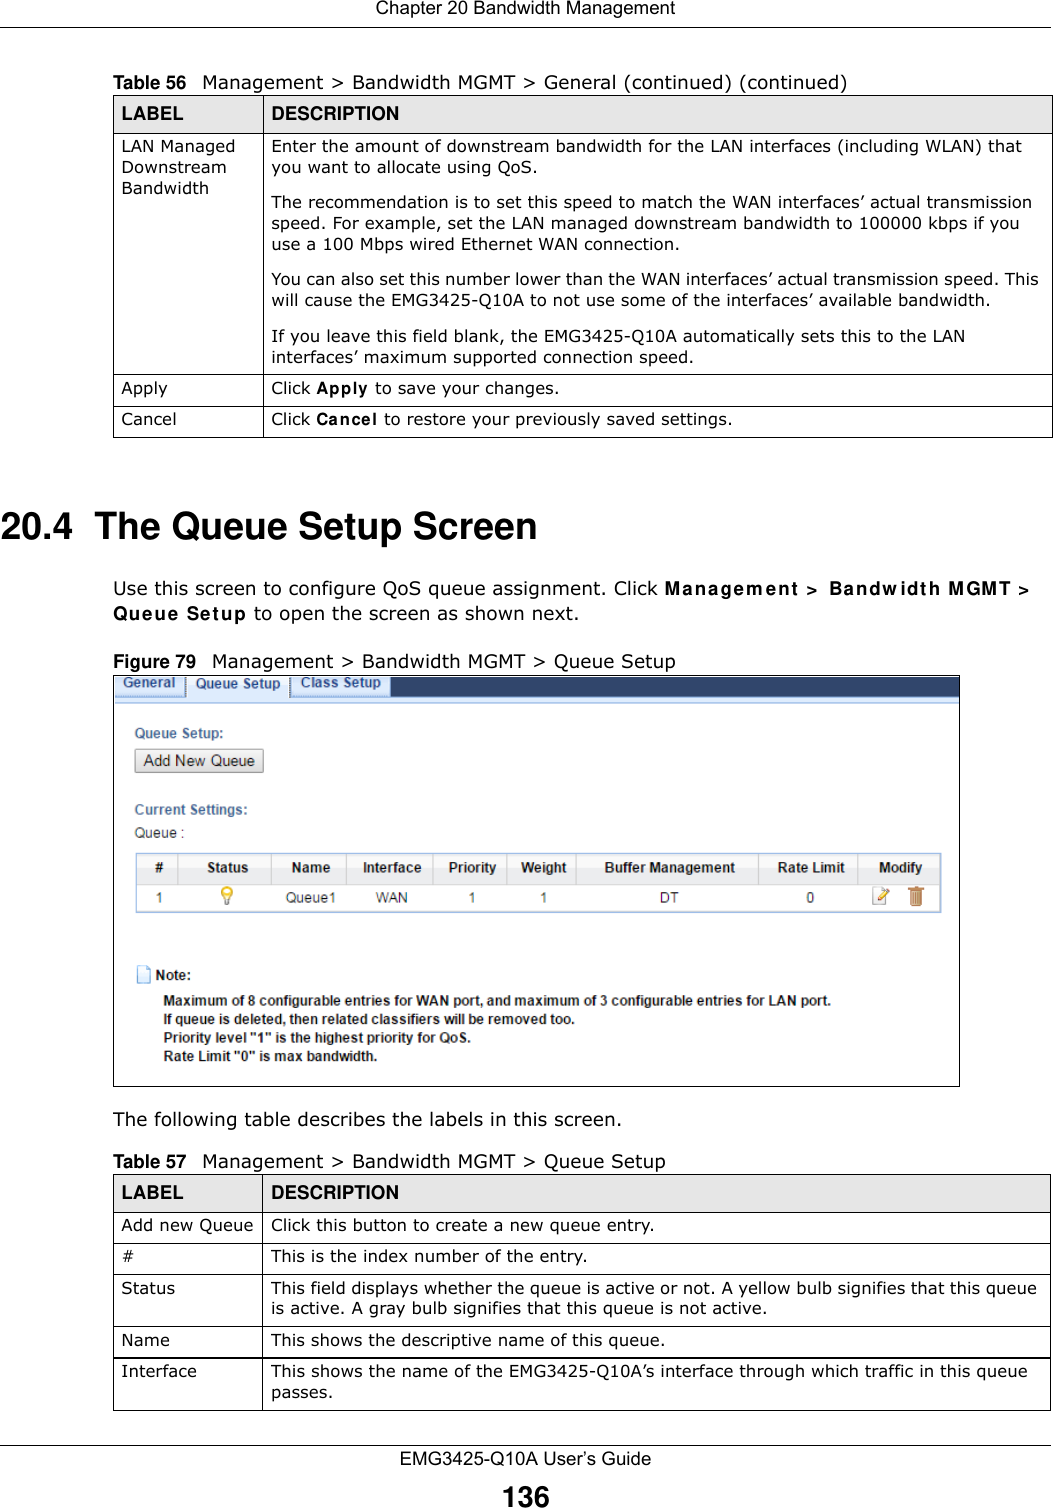 Chapter 20 Bandwidth ManagementEMG3425-Q10A User’s Guide13620.4  The Queue Setup ScreenUse this screen to configure QoS queue assignment. Click Mana gem ent  &gt;  Ba ndw idth M GMT &gt;  Qu e u e  Set up to open the screen as shown next. Figure 79   Management &gt; Bandwidth MGMT &gt; Queue SetupThe following table describes the labels in this screen. LAN Managed Downstream Bandwidth Enter the amount of downstream bandwidth for the LAN interfaces (including WLAN) that you want to allocate using QoS. The recommendation is to set this speed to match the WAN interfaces’ actual transmission speed. For example, set the LAN managed downstream bandwidth to 100000 kbps if you use a 100 Mbps wired Ethernet WAN connection.        You can also set this number lower than the WAN interfaces’ actual transmission speed. This will cause the EMG3425-Q10A to not use some of the interfaces’ available bandwidth.If you leave this field blank, the EMG3425-Q10A automatically sets this to the LAN interfaces’ maximum supported connection speed.Apply Click Apply to save your changes.Cancel Click Cancel to restore your previously saved settings.Table 56   Management &gt; Bandwidth MGMT &gt; General (continued) (continued)LABEL DESCRIPTIONTable 57   Management &gt; Bandwidth MGMT &gt; Queue SetupLABEL DESCRIPTIONAdd new Queue Click this button to create a new queue entry.#This is the index number of the entry.Status This field displays whether the queue is active or not. A yellow bulb signifies that this queue is active. A gray bulb signifies that this queue is not active.Name This shows the descriptive name of this queue.Interface This shows the name of the EMG3425-Q10A’s interface through which traffic in this queue passes.